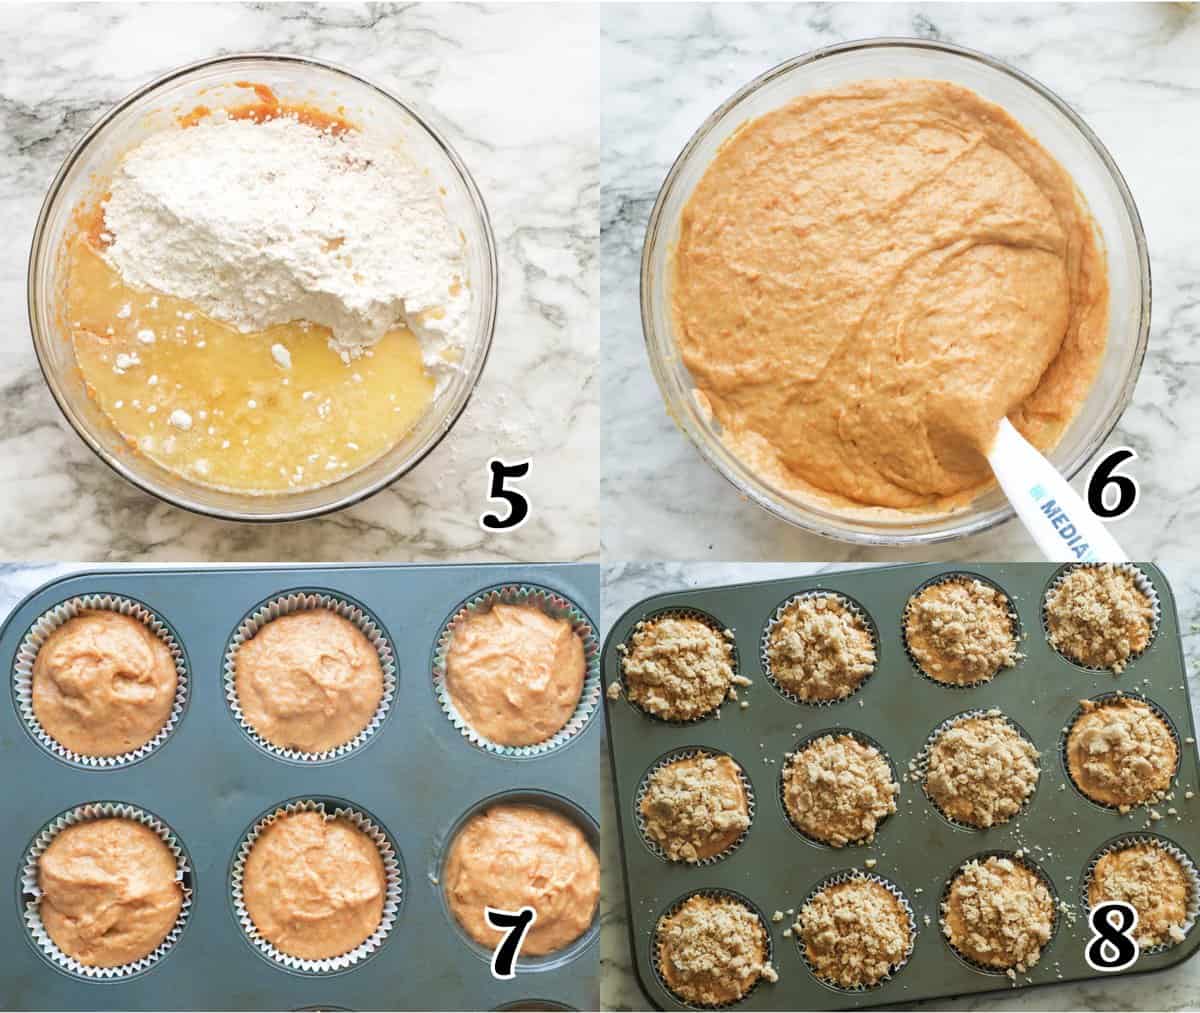 Mix and divide dough and top with streusel